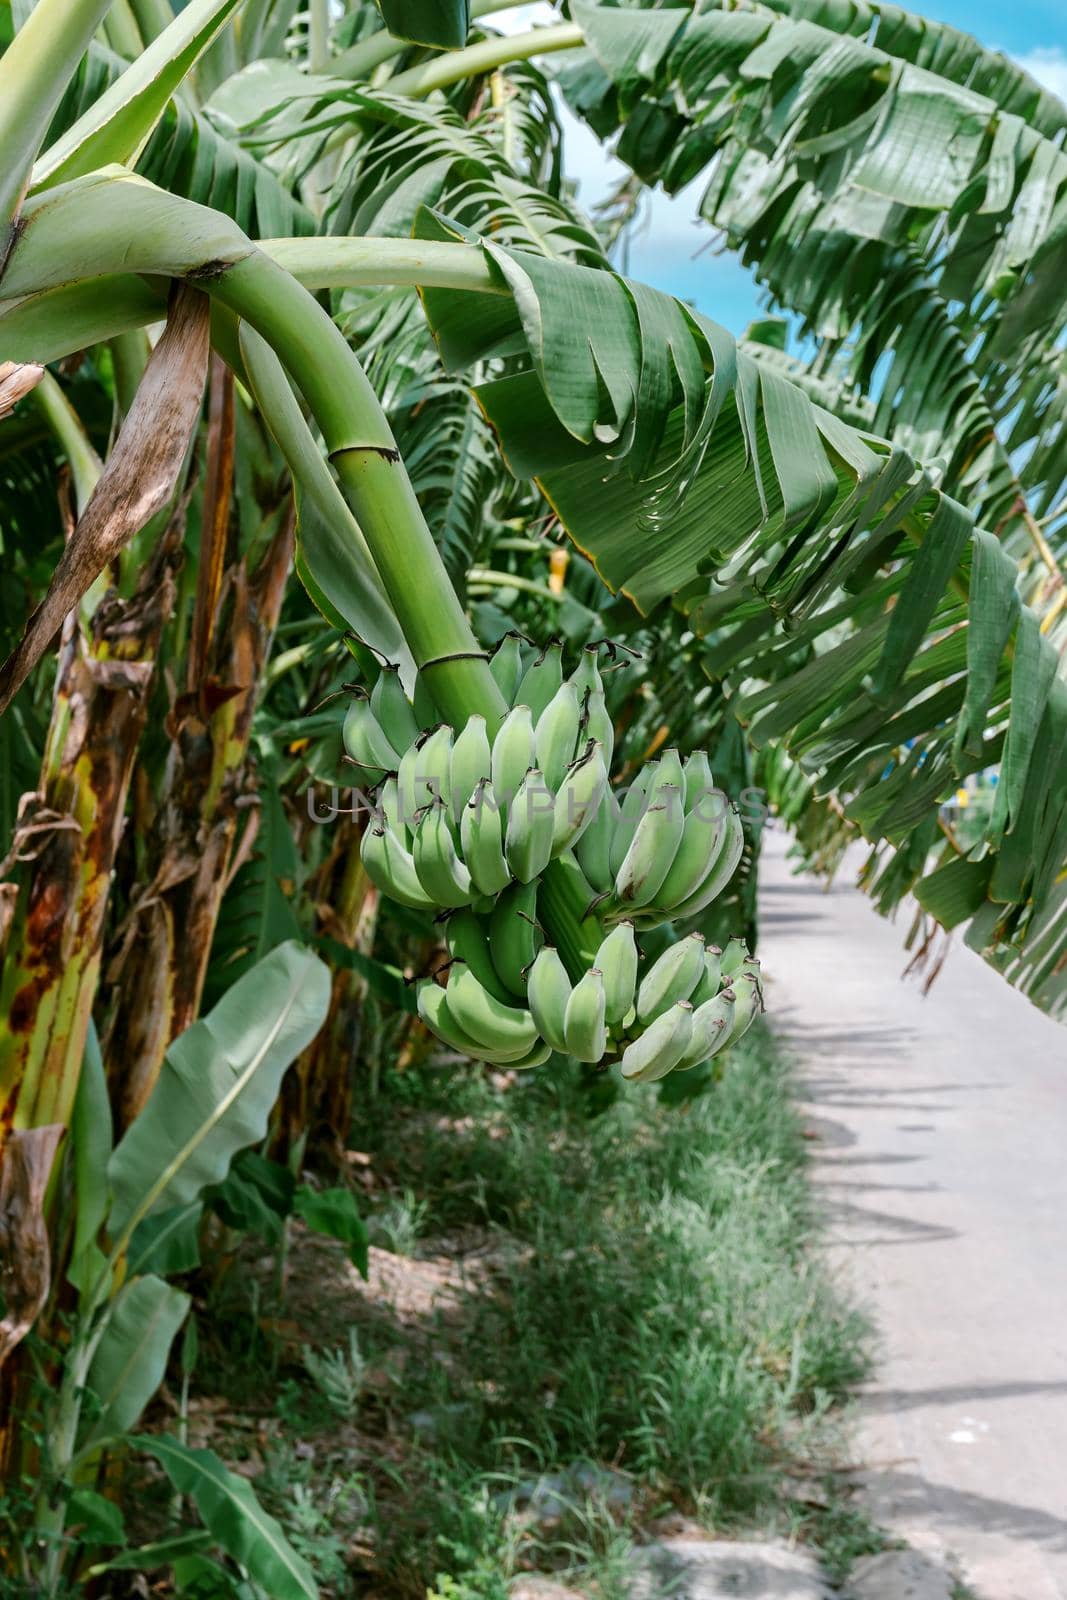 Group of green unripe bananas that are gathered on the same branch on a banana tree.